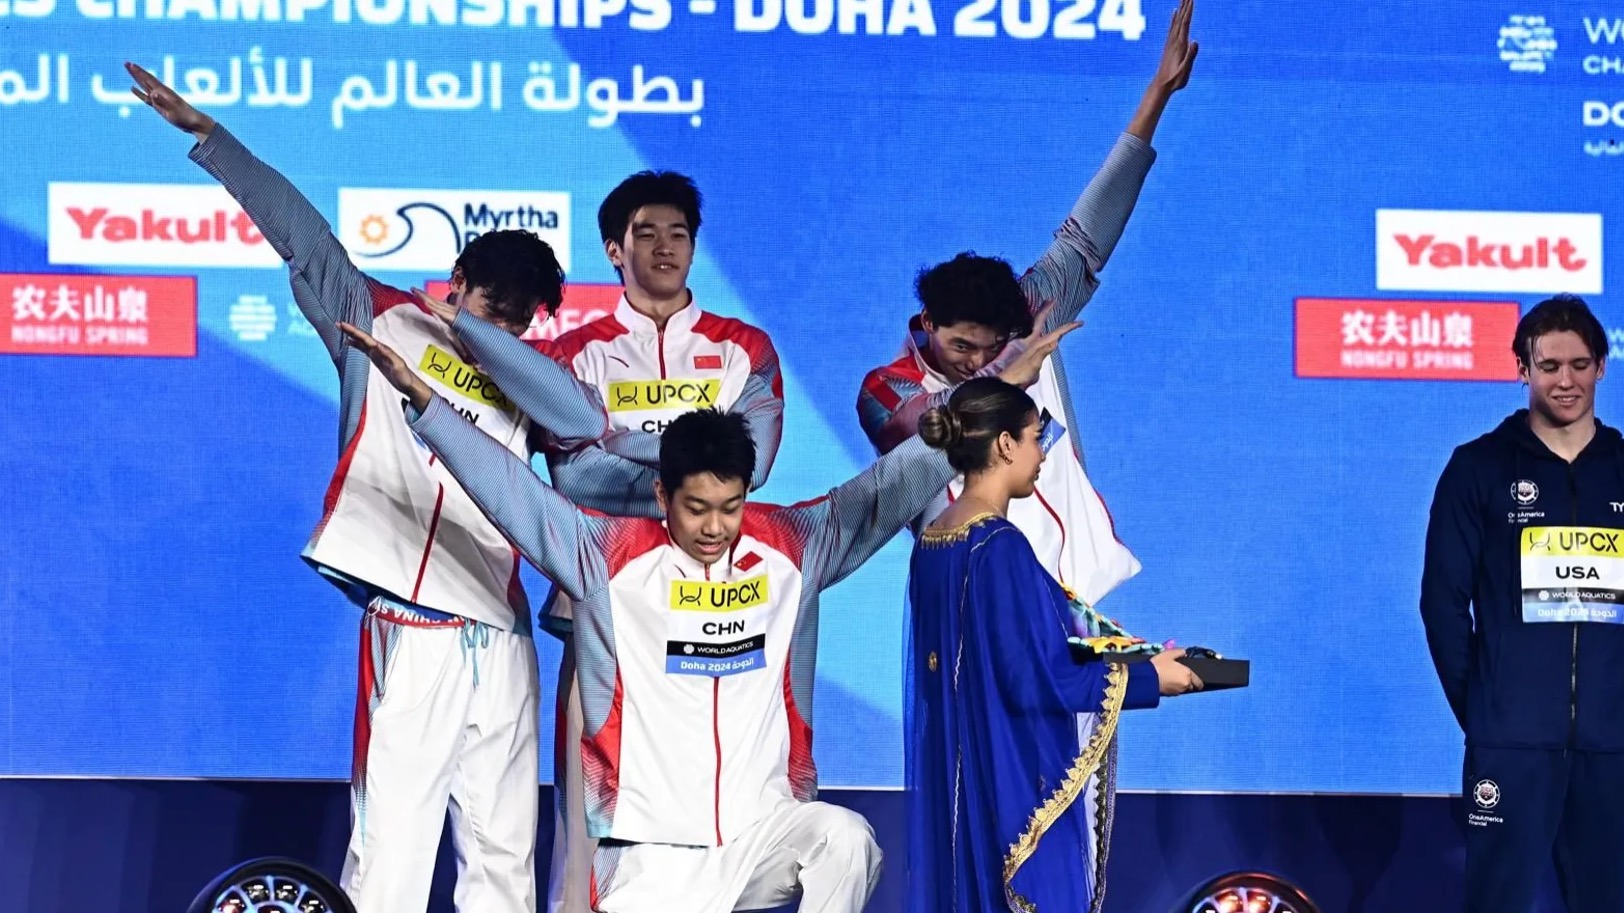 China's athletes celebrate on the podium after winning the men's 4x100m freestyle relay final at the World Aquatics Championships in Doha, Qatar, February 11, 2024. /CFP